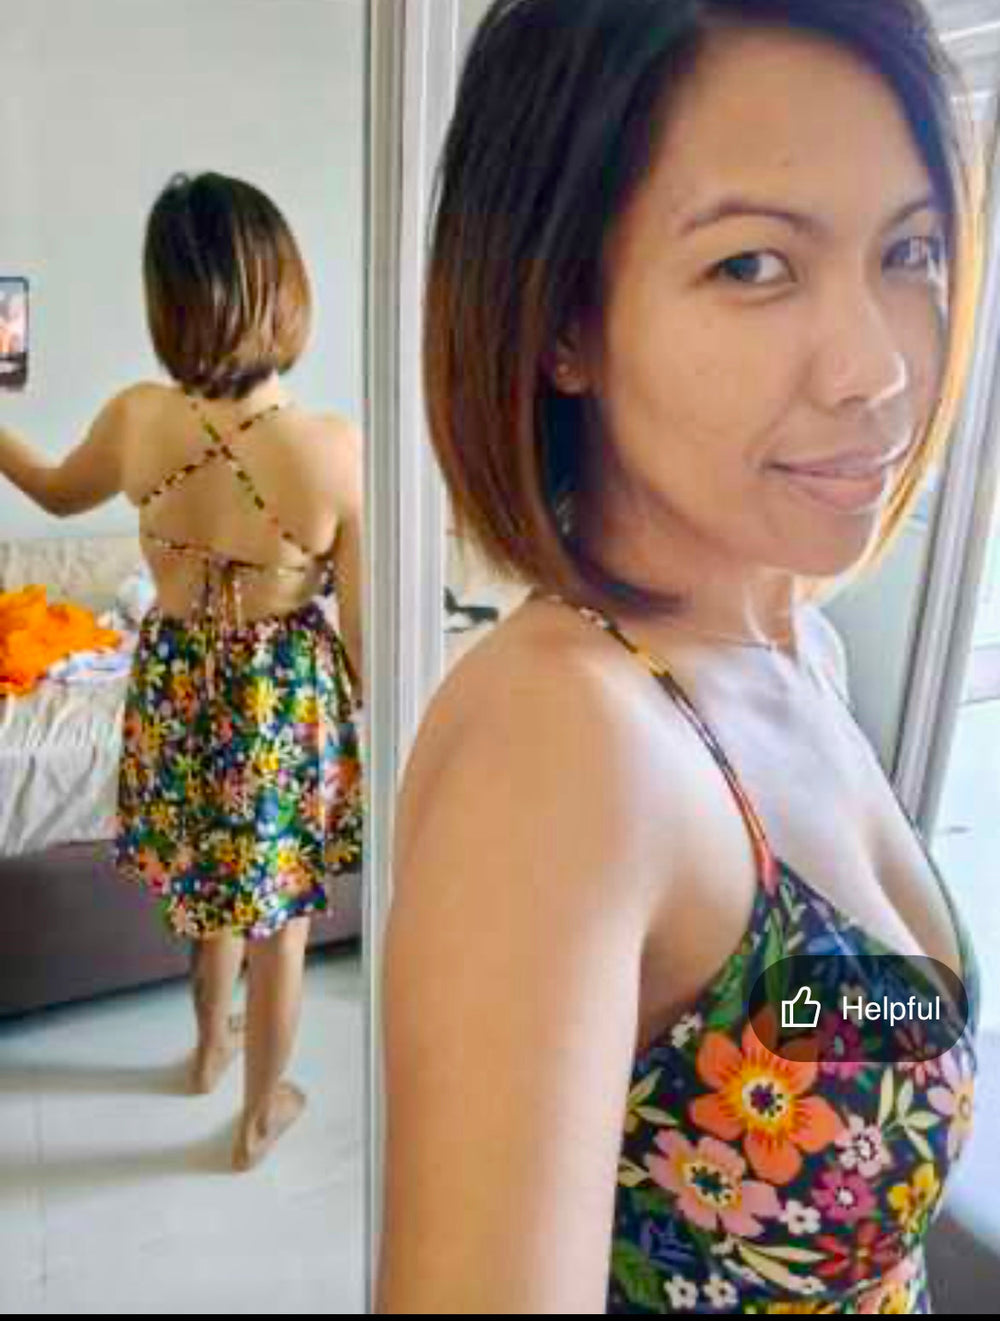 Image of SHEIN Ditsy Floral Print Criss Cross Tie Backless Cami Dress